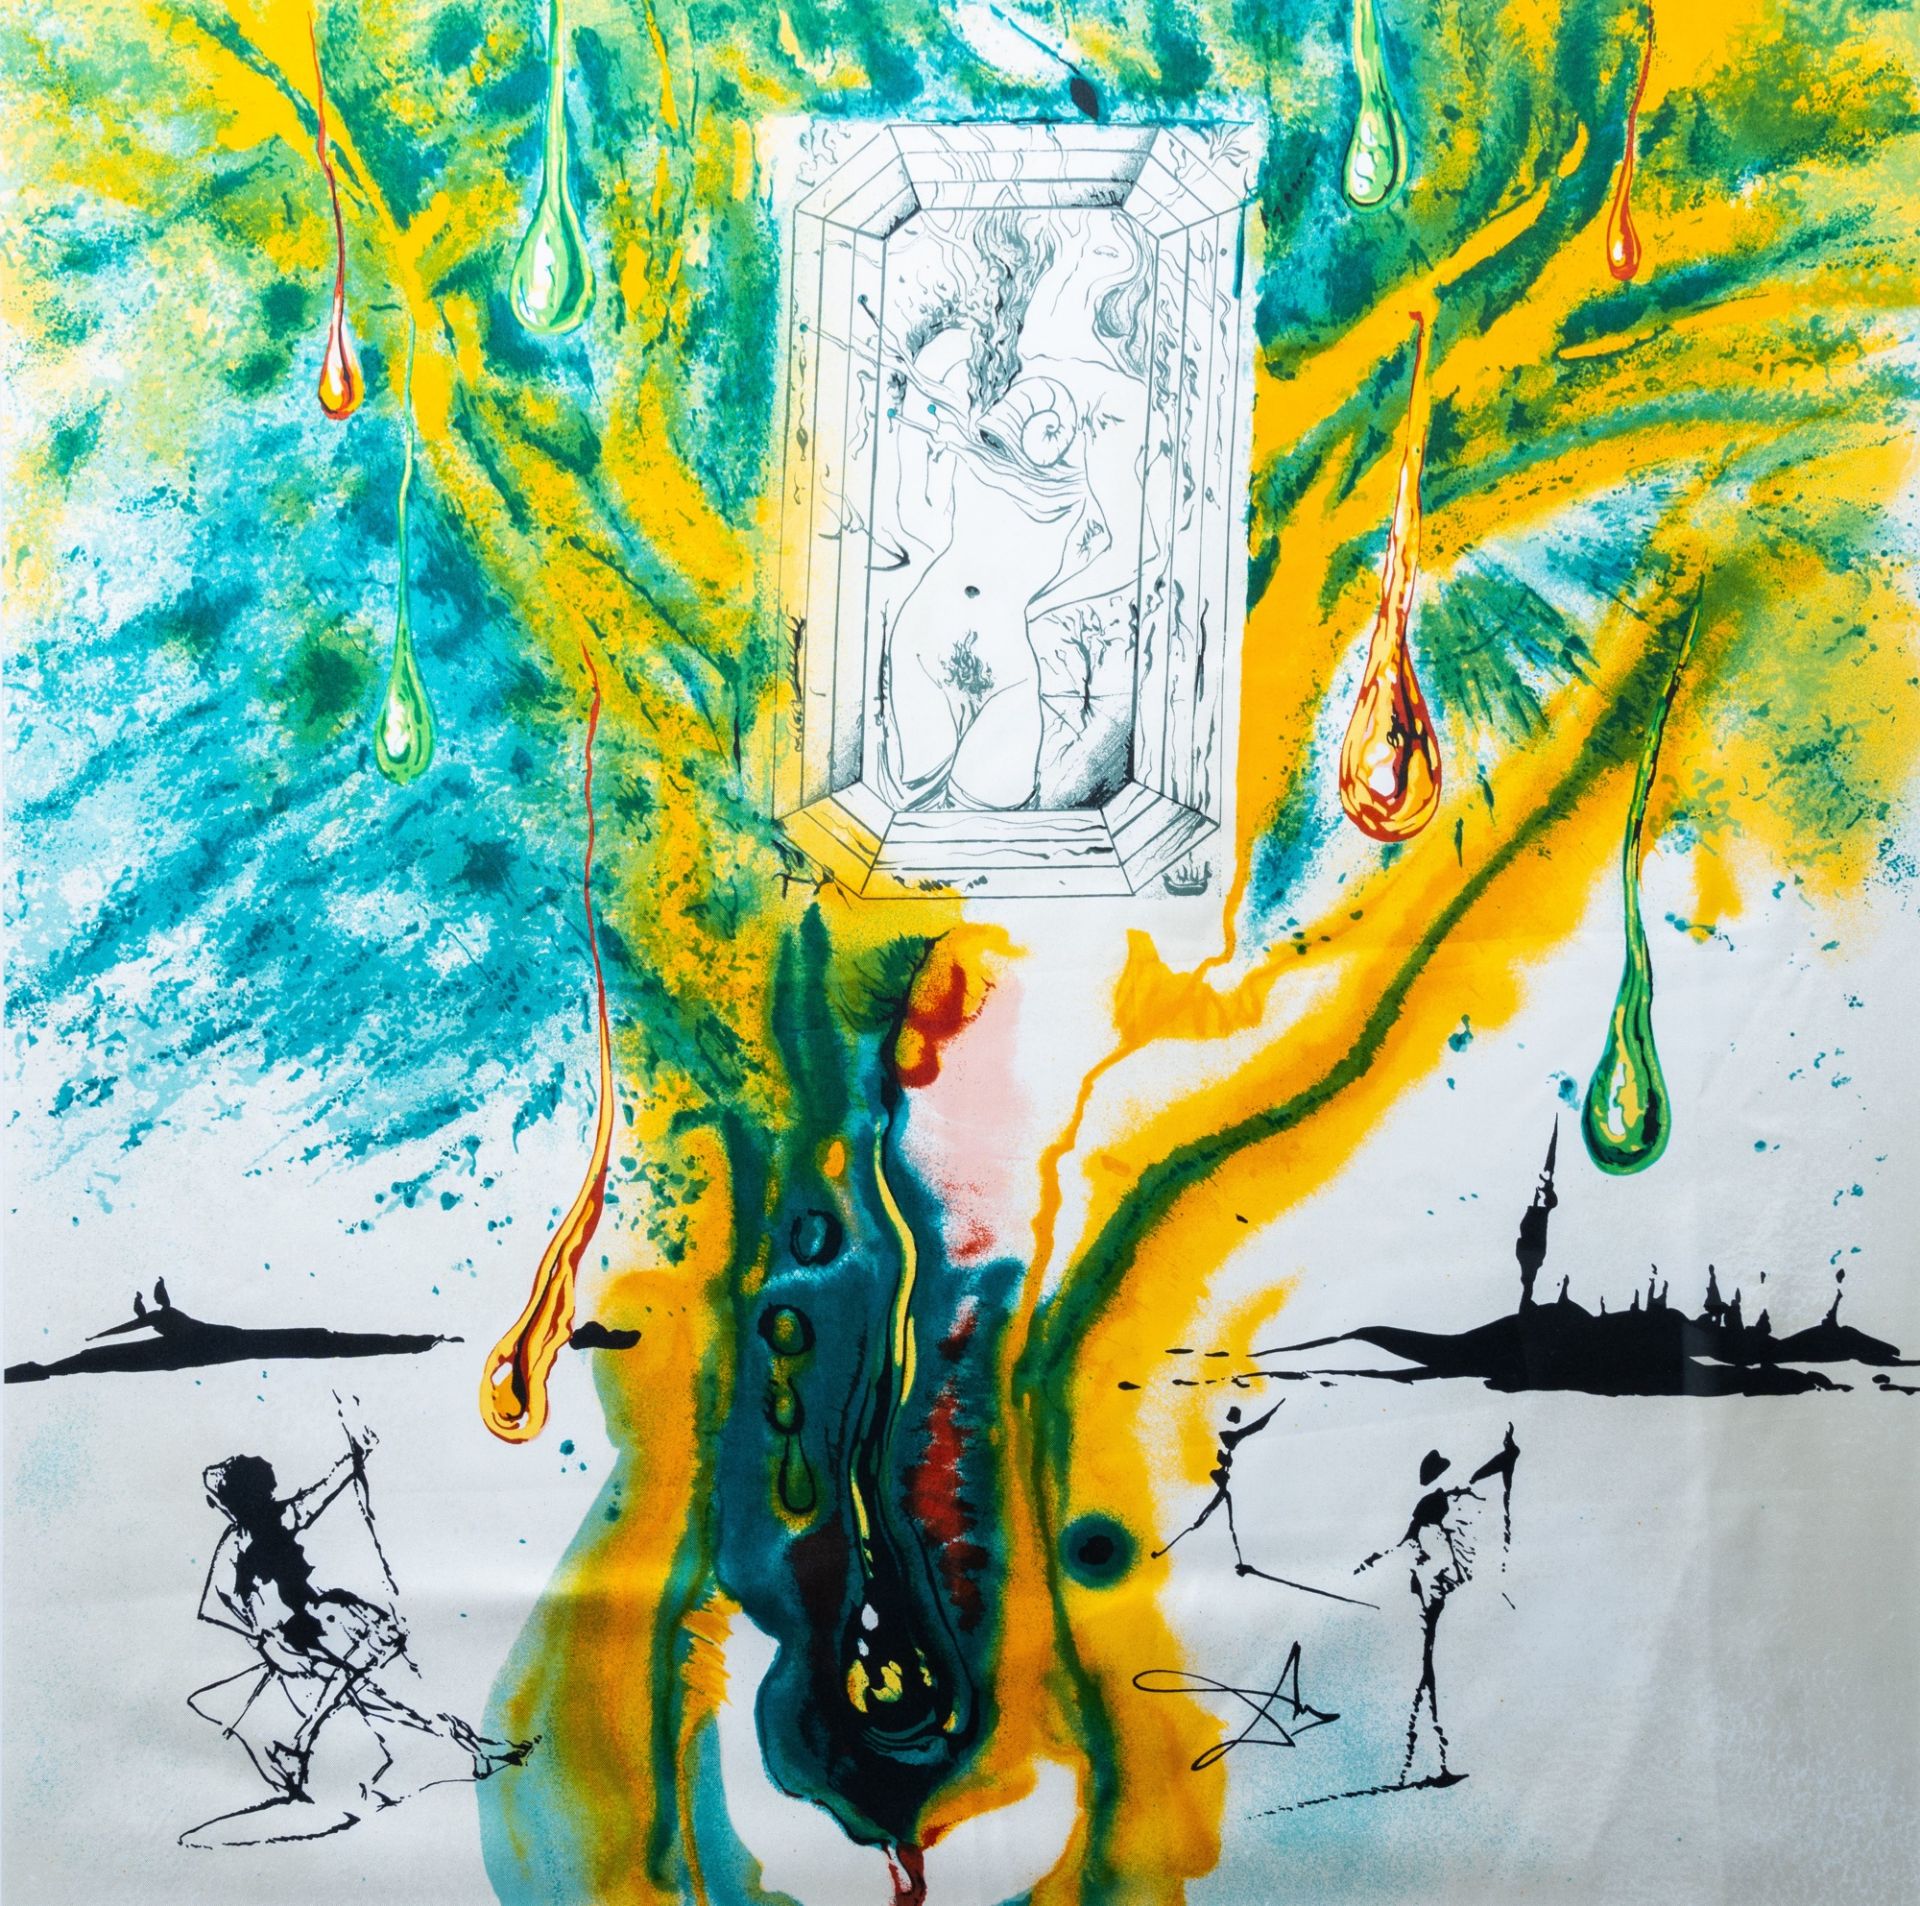 Salvador Dali (1904-1989, after): 'The Emerald table', serigraph on silk, ed. 1963/2000, (1990)